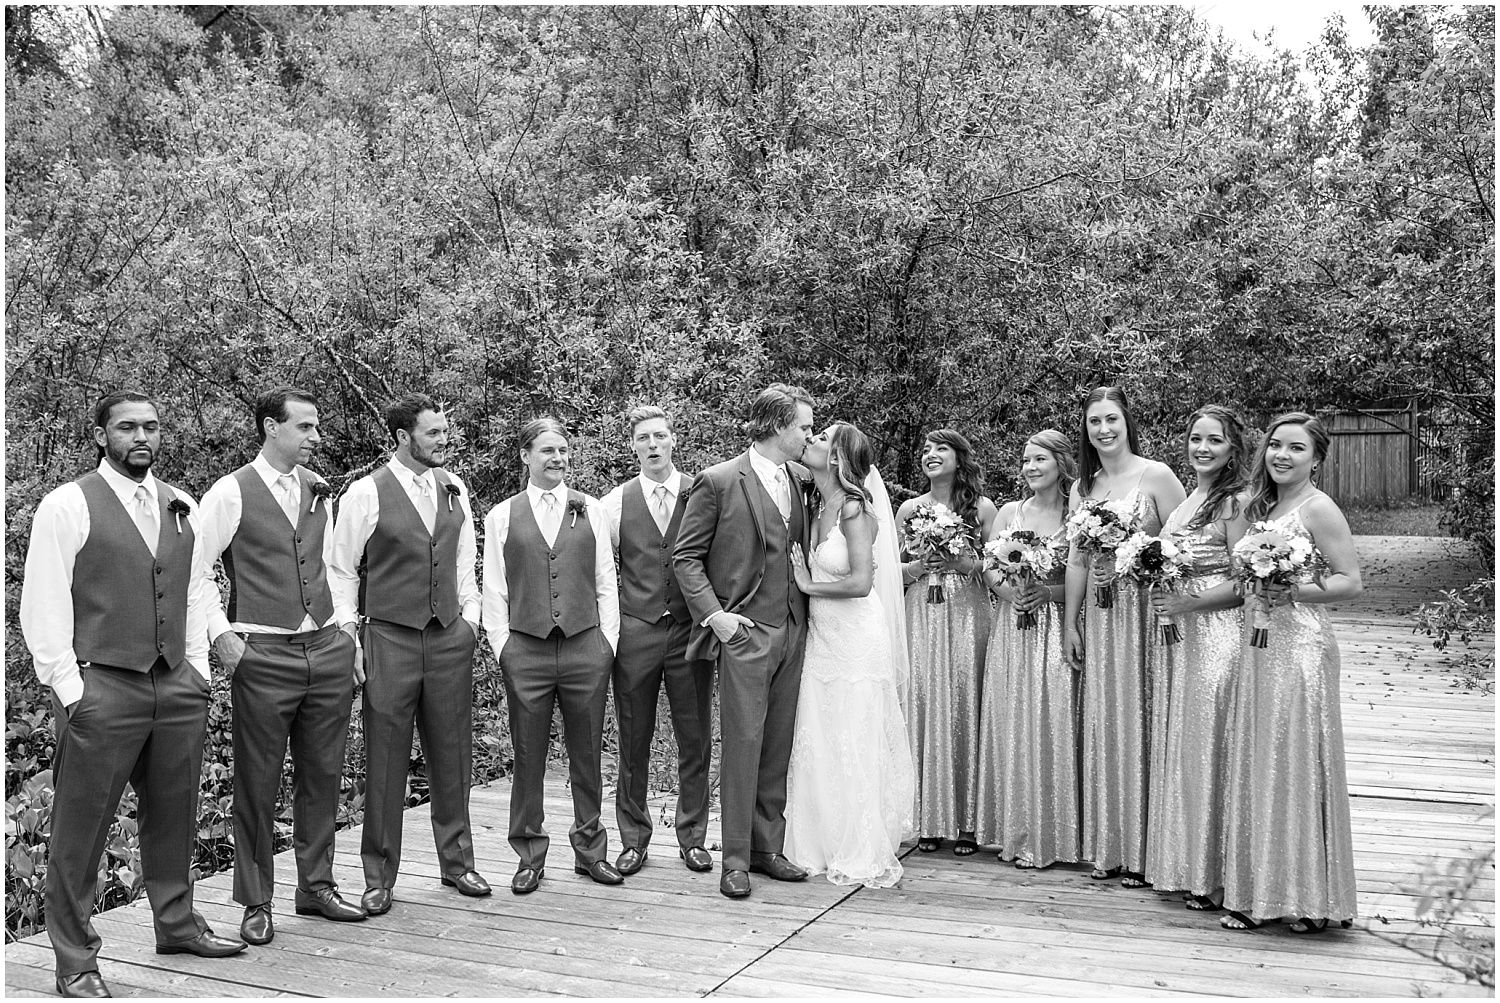 Bridal party pictures at Black Diamond Gardens wedding